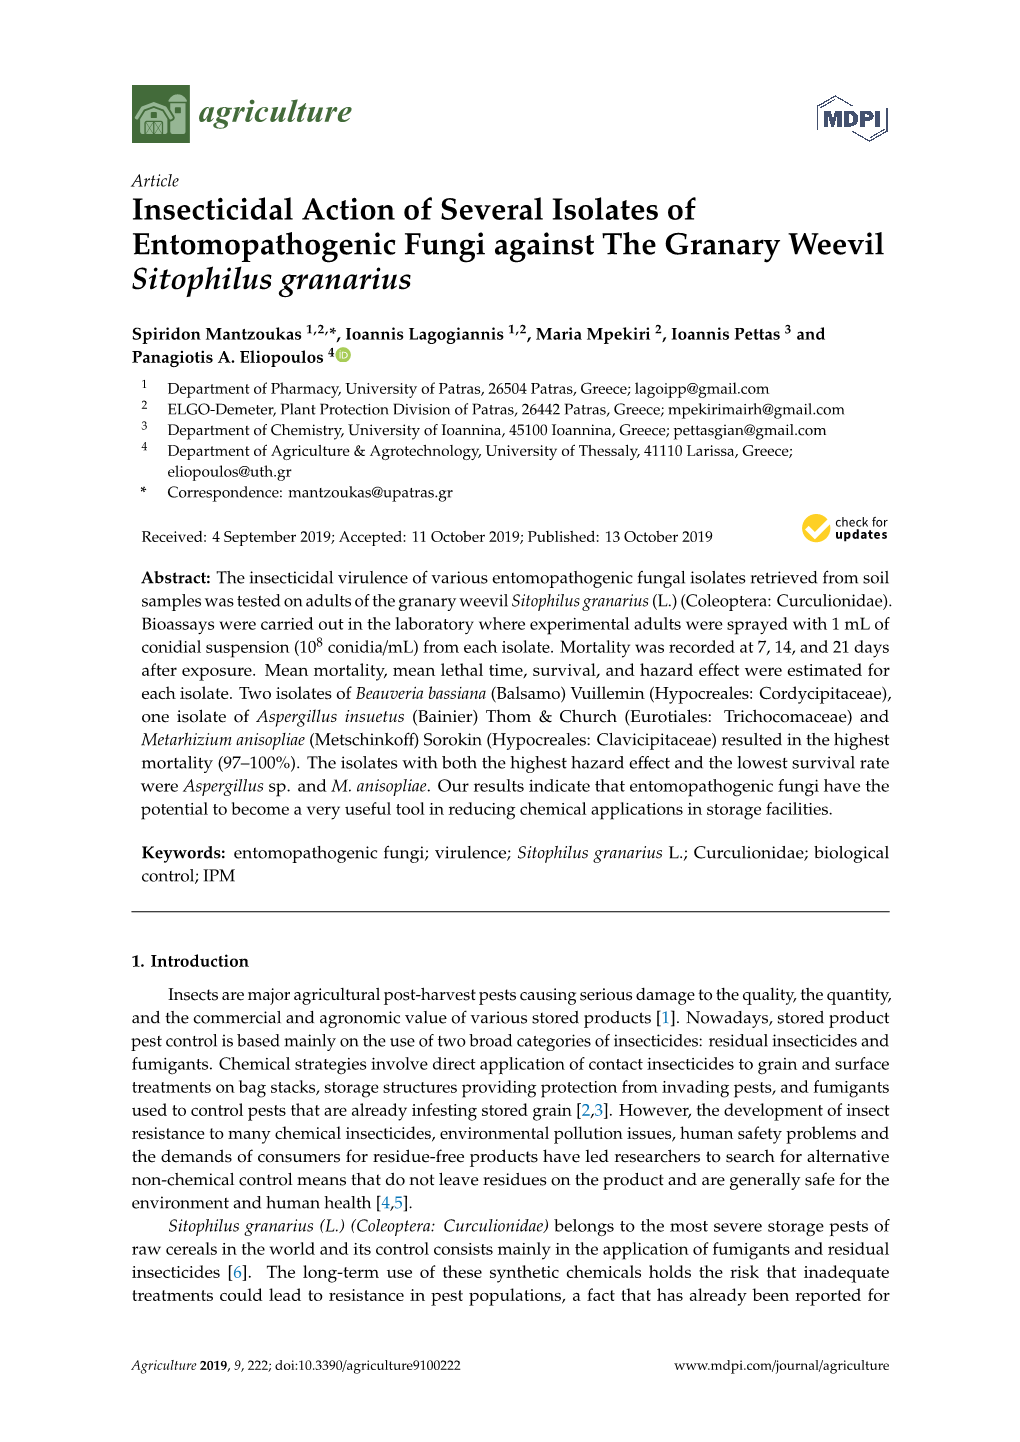 Insecticidal Action of Several Isolates of Entomopathogenic Fungi Against the Granary Weevil Sitophilus Granarius